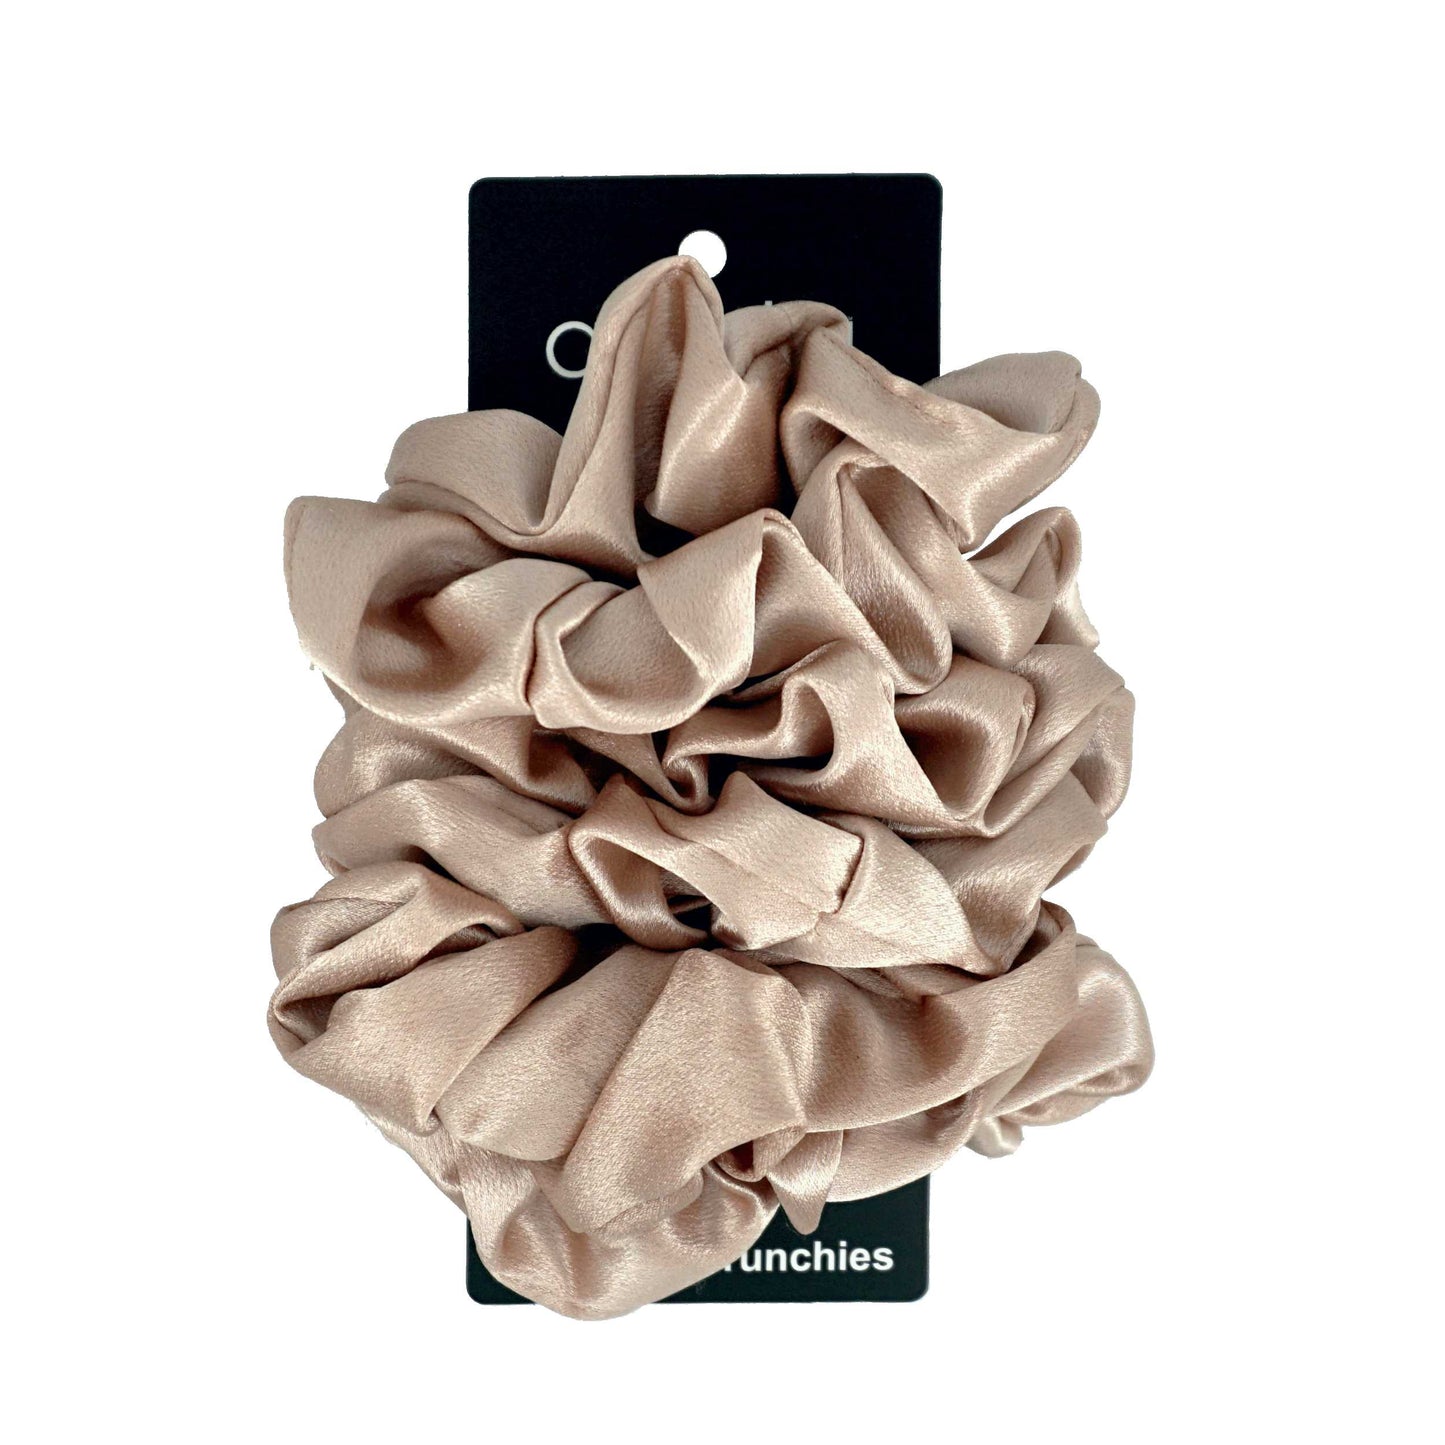 Amelia Beauty, Tan Imitation Silk Scrunchies, 4.5in Diameter, Gentle on Hair, Strong Hold, No Snag, No Dents or Creases. 6 Pack